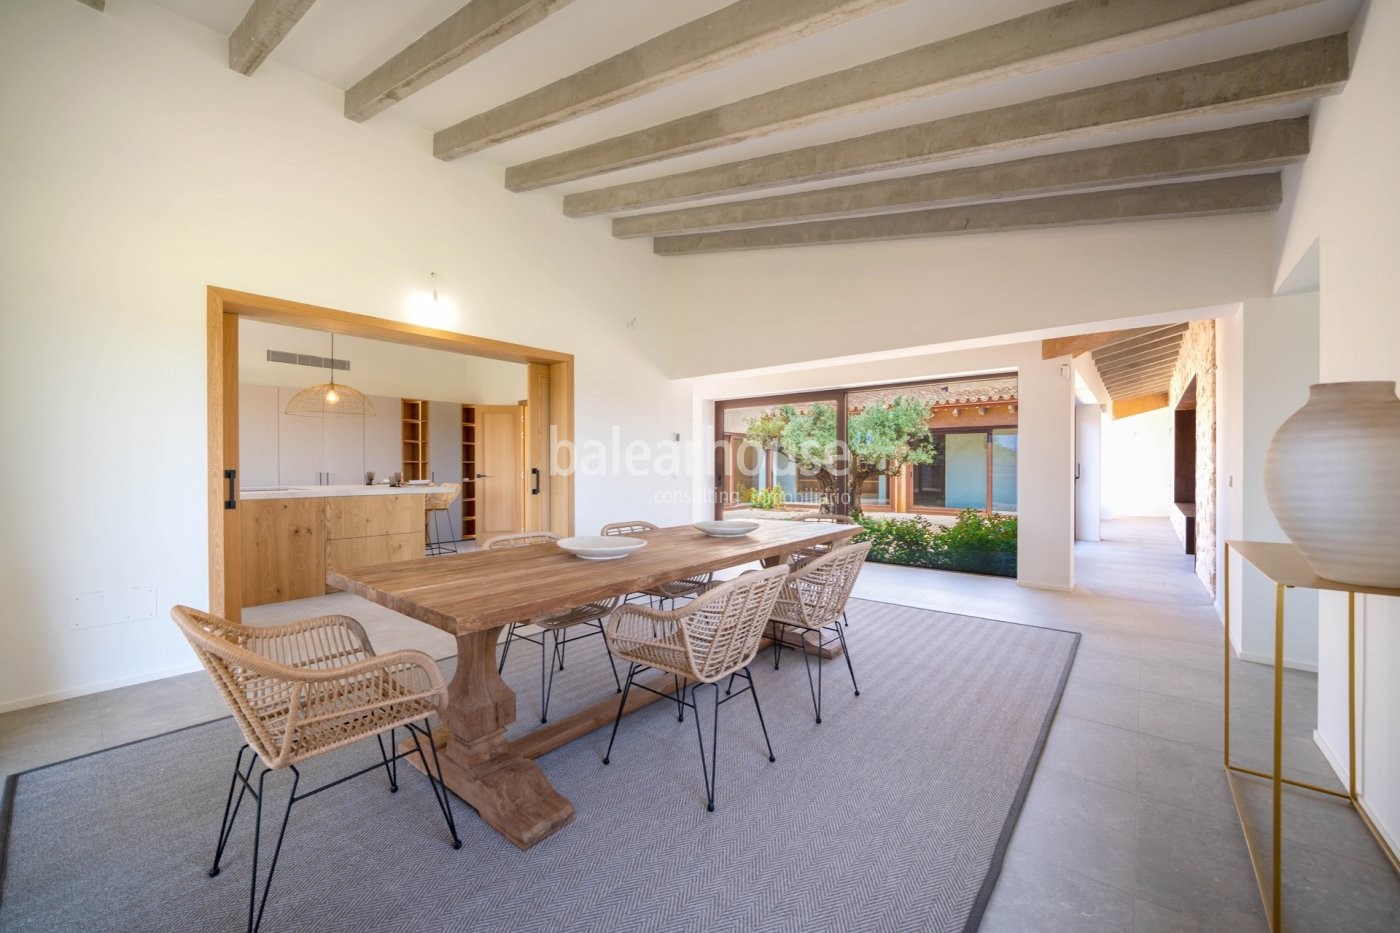 Incredible newly built rustic finca surrounded by porches and terraces close to beautiful beaches.